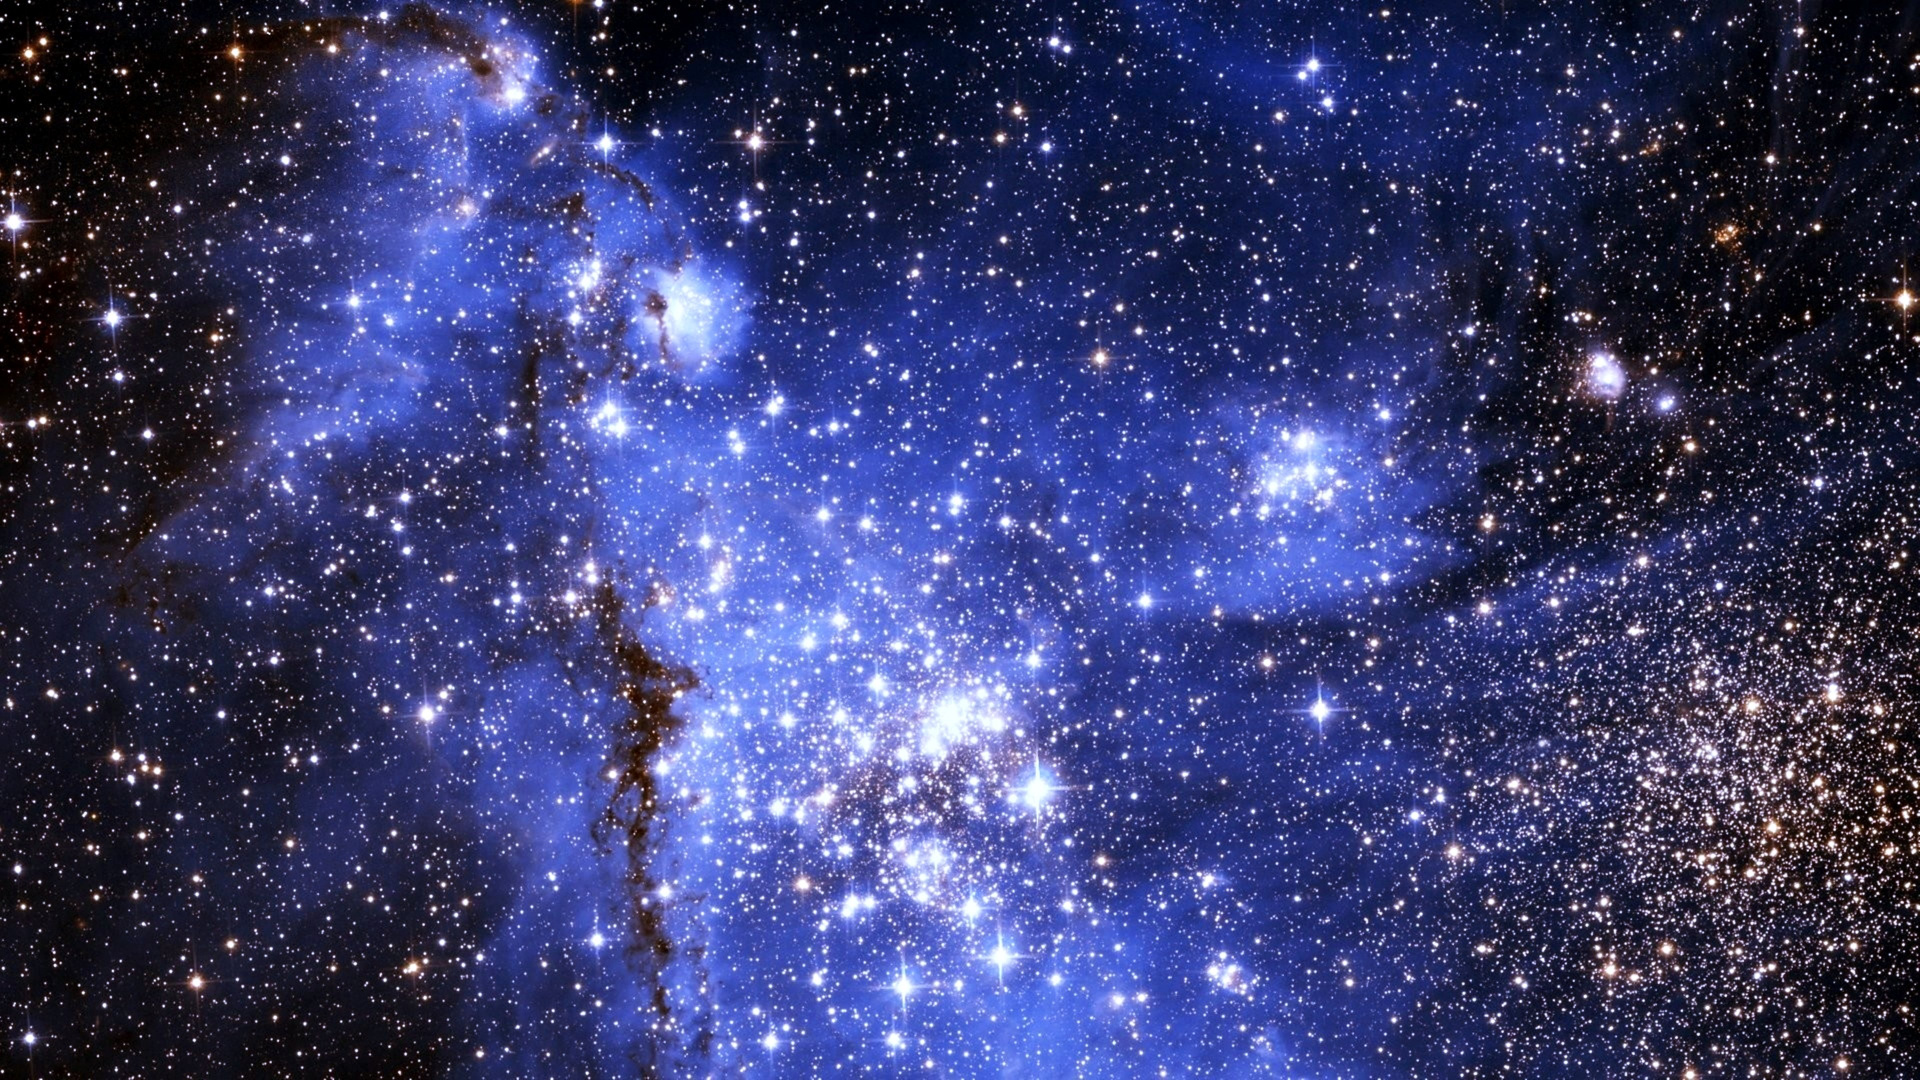 Blue and White Starry Night. Wallpaper in 1920x1080 Resolution